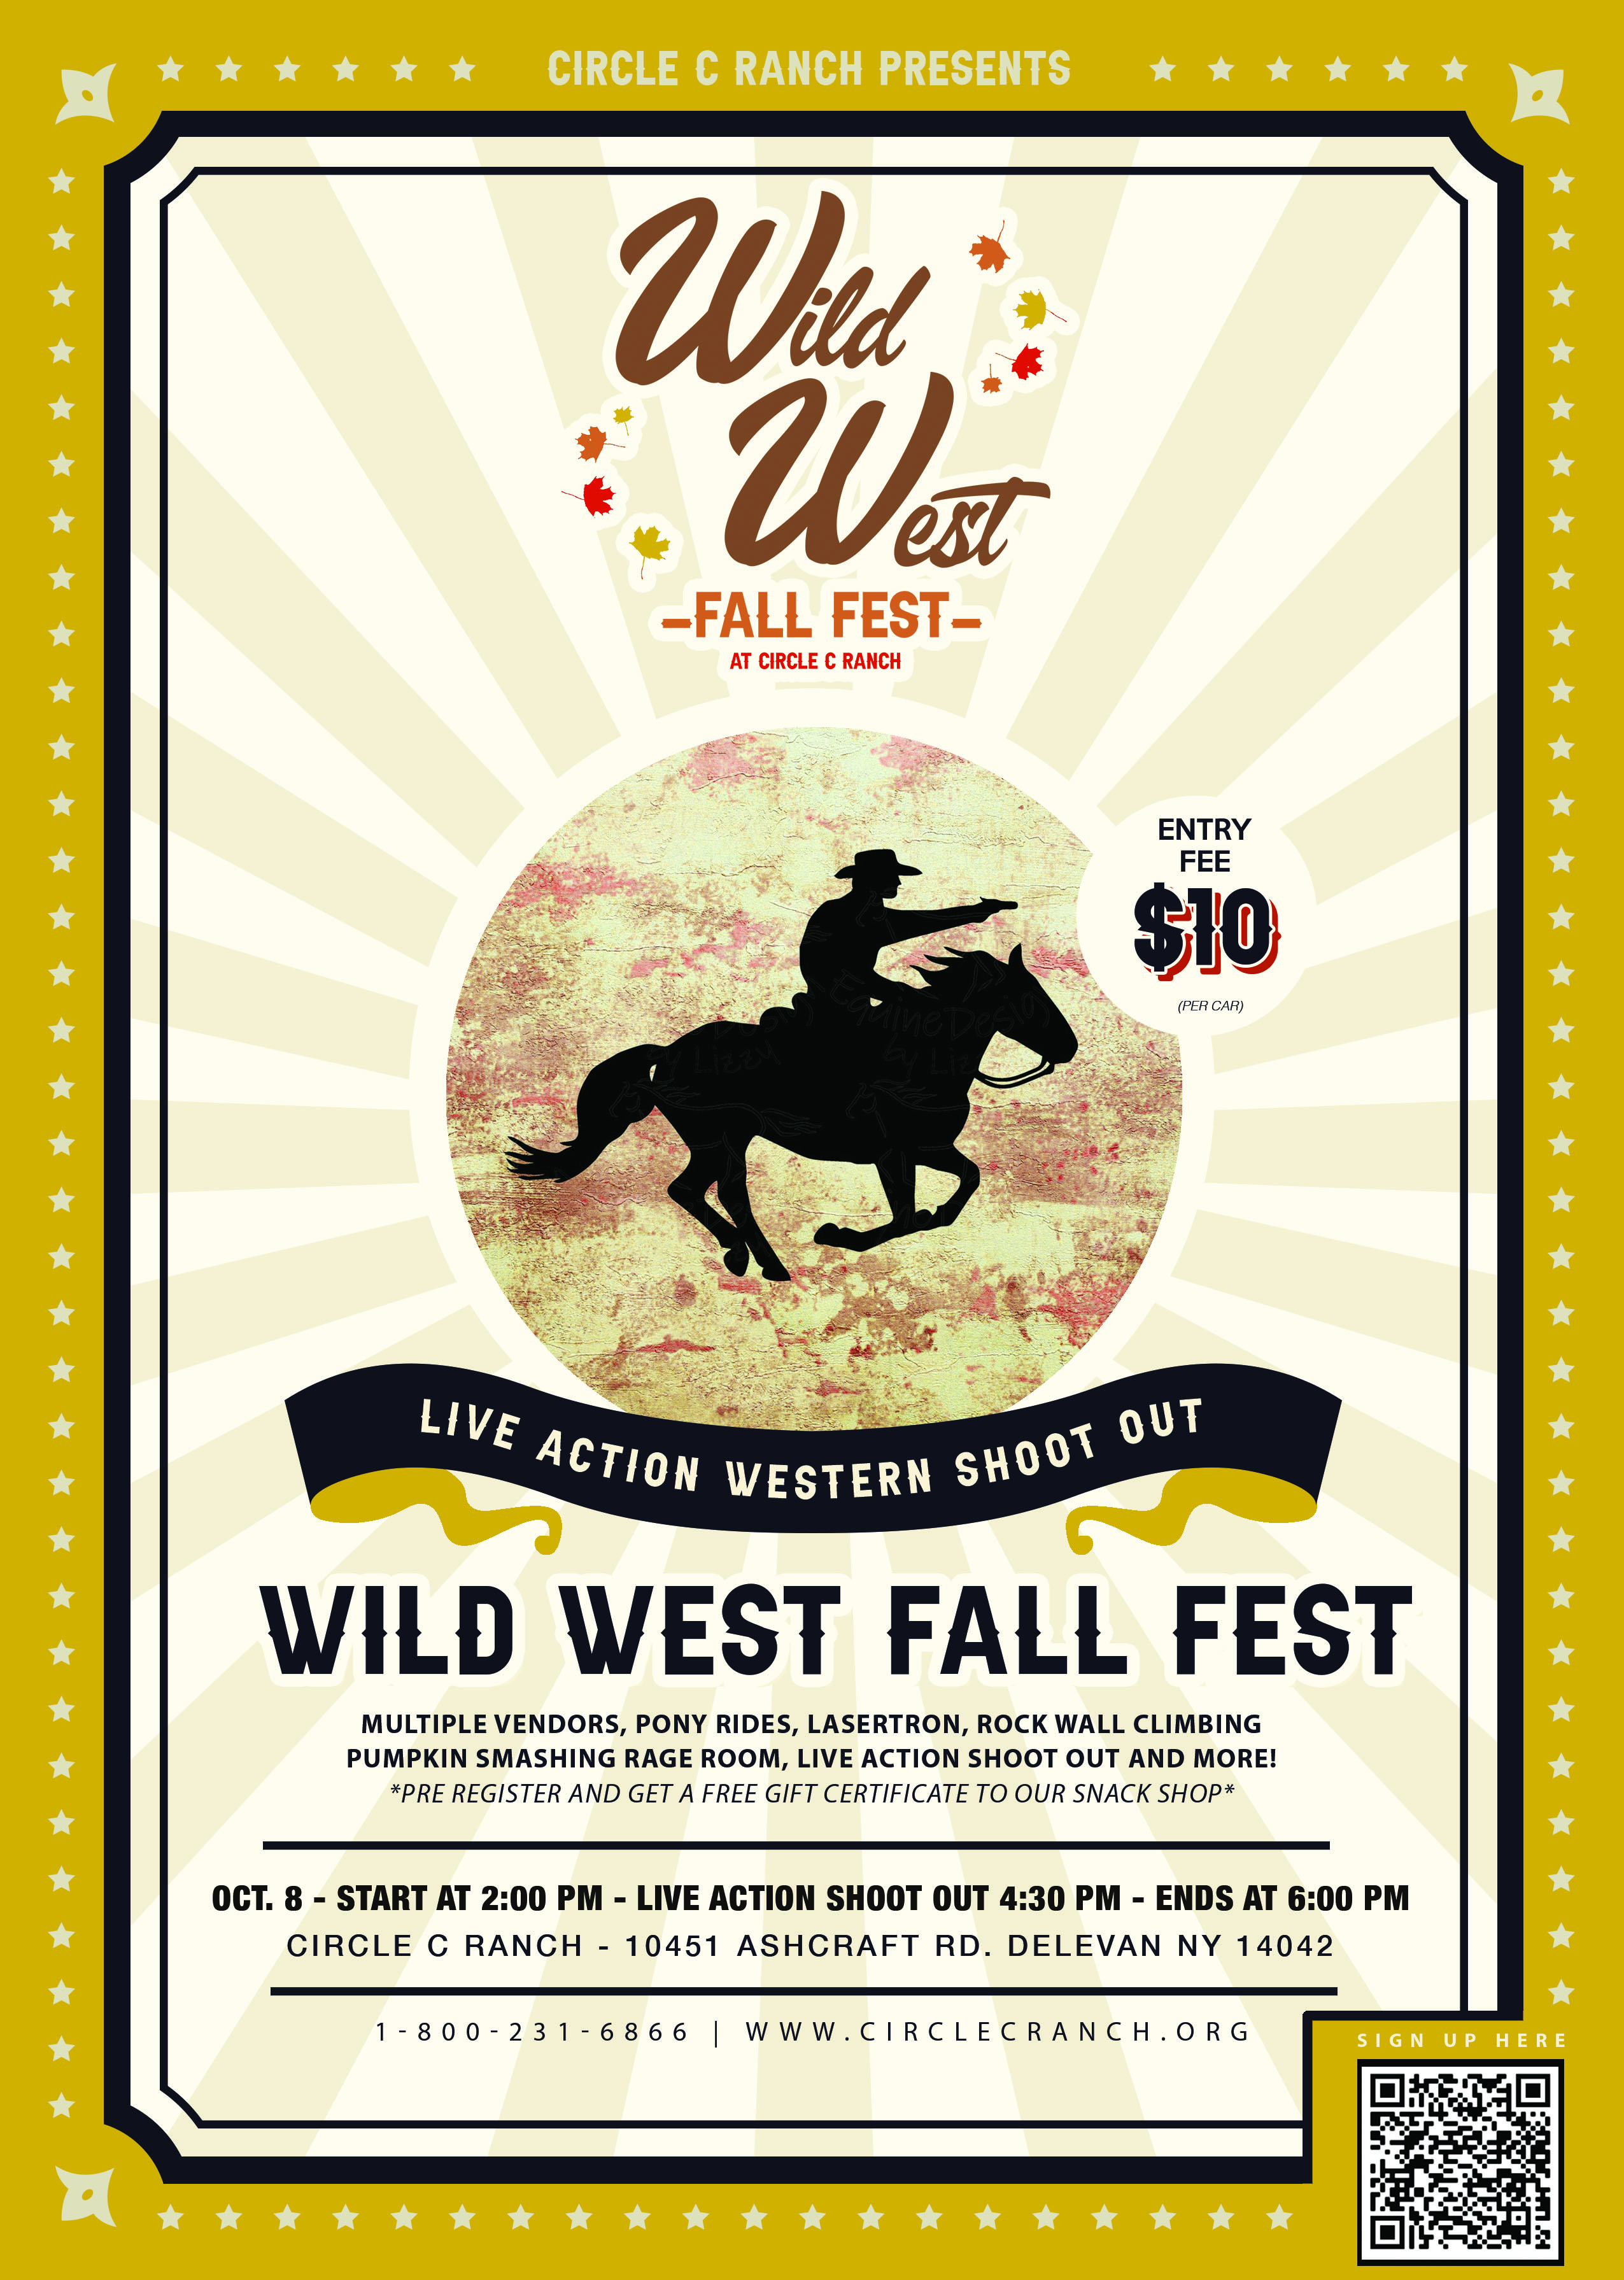 Flyers for Wild West Fall Fest 22Concert